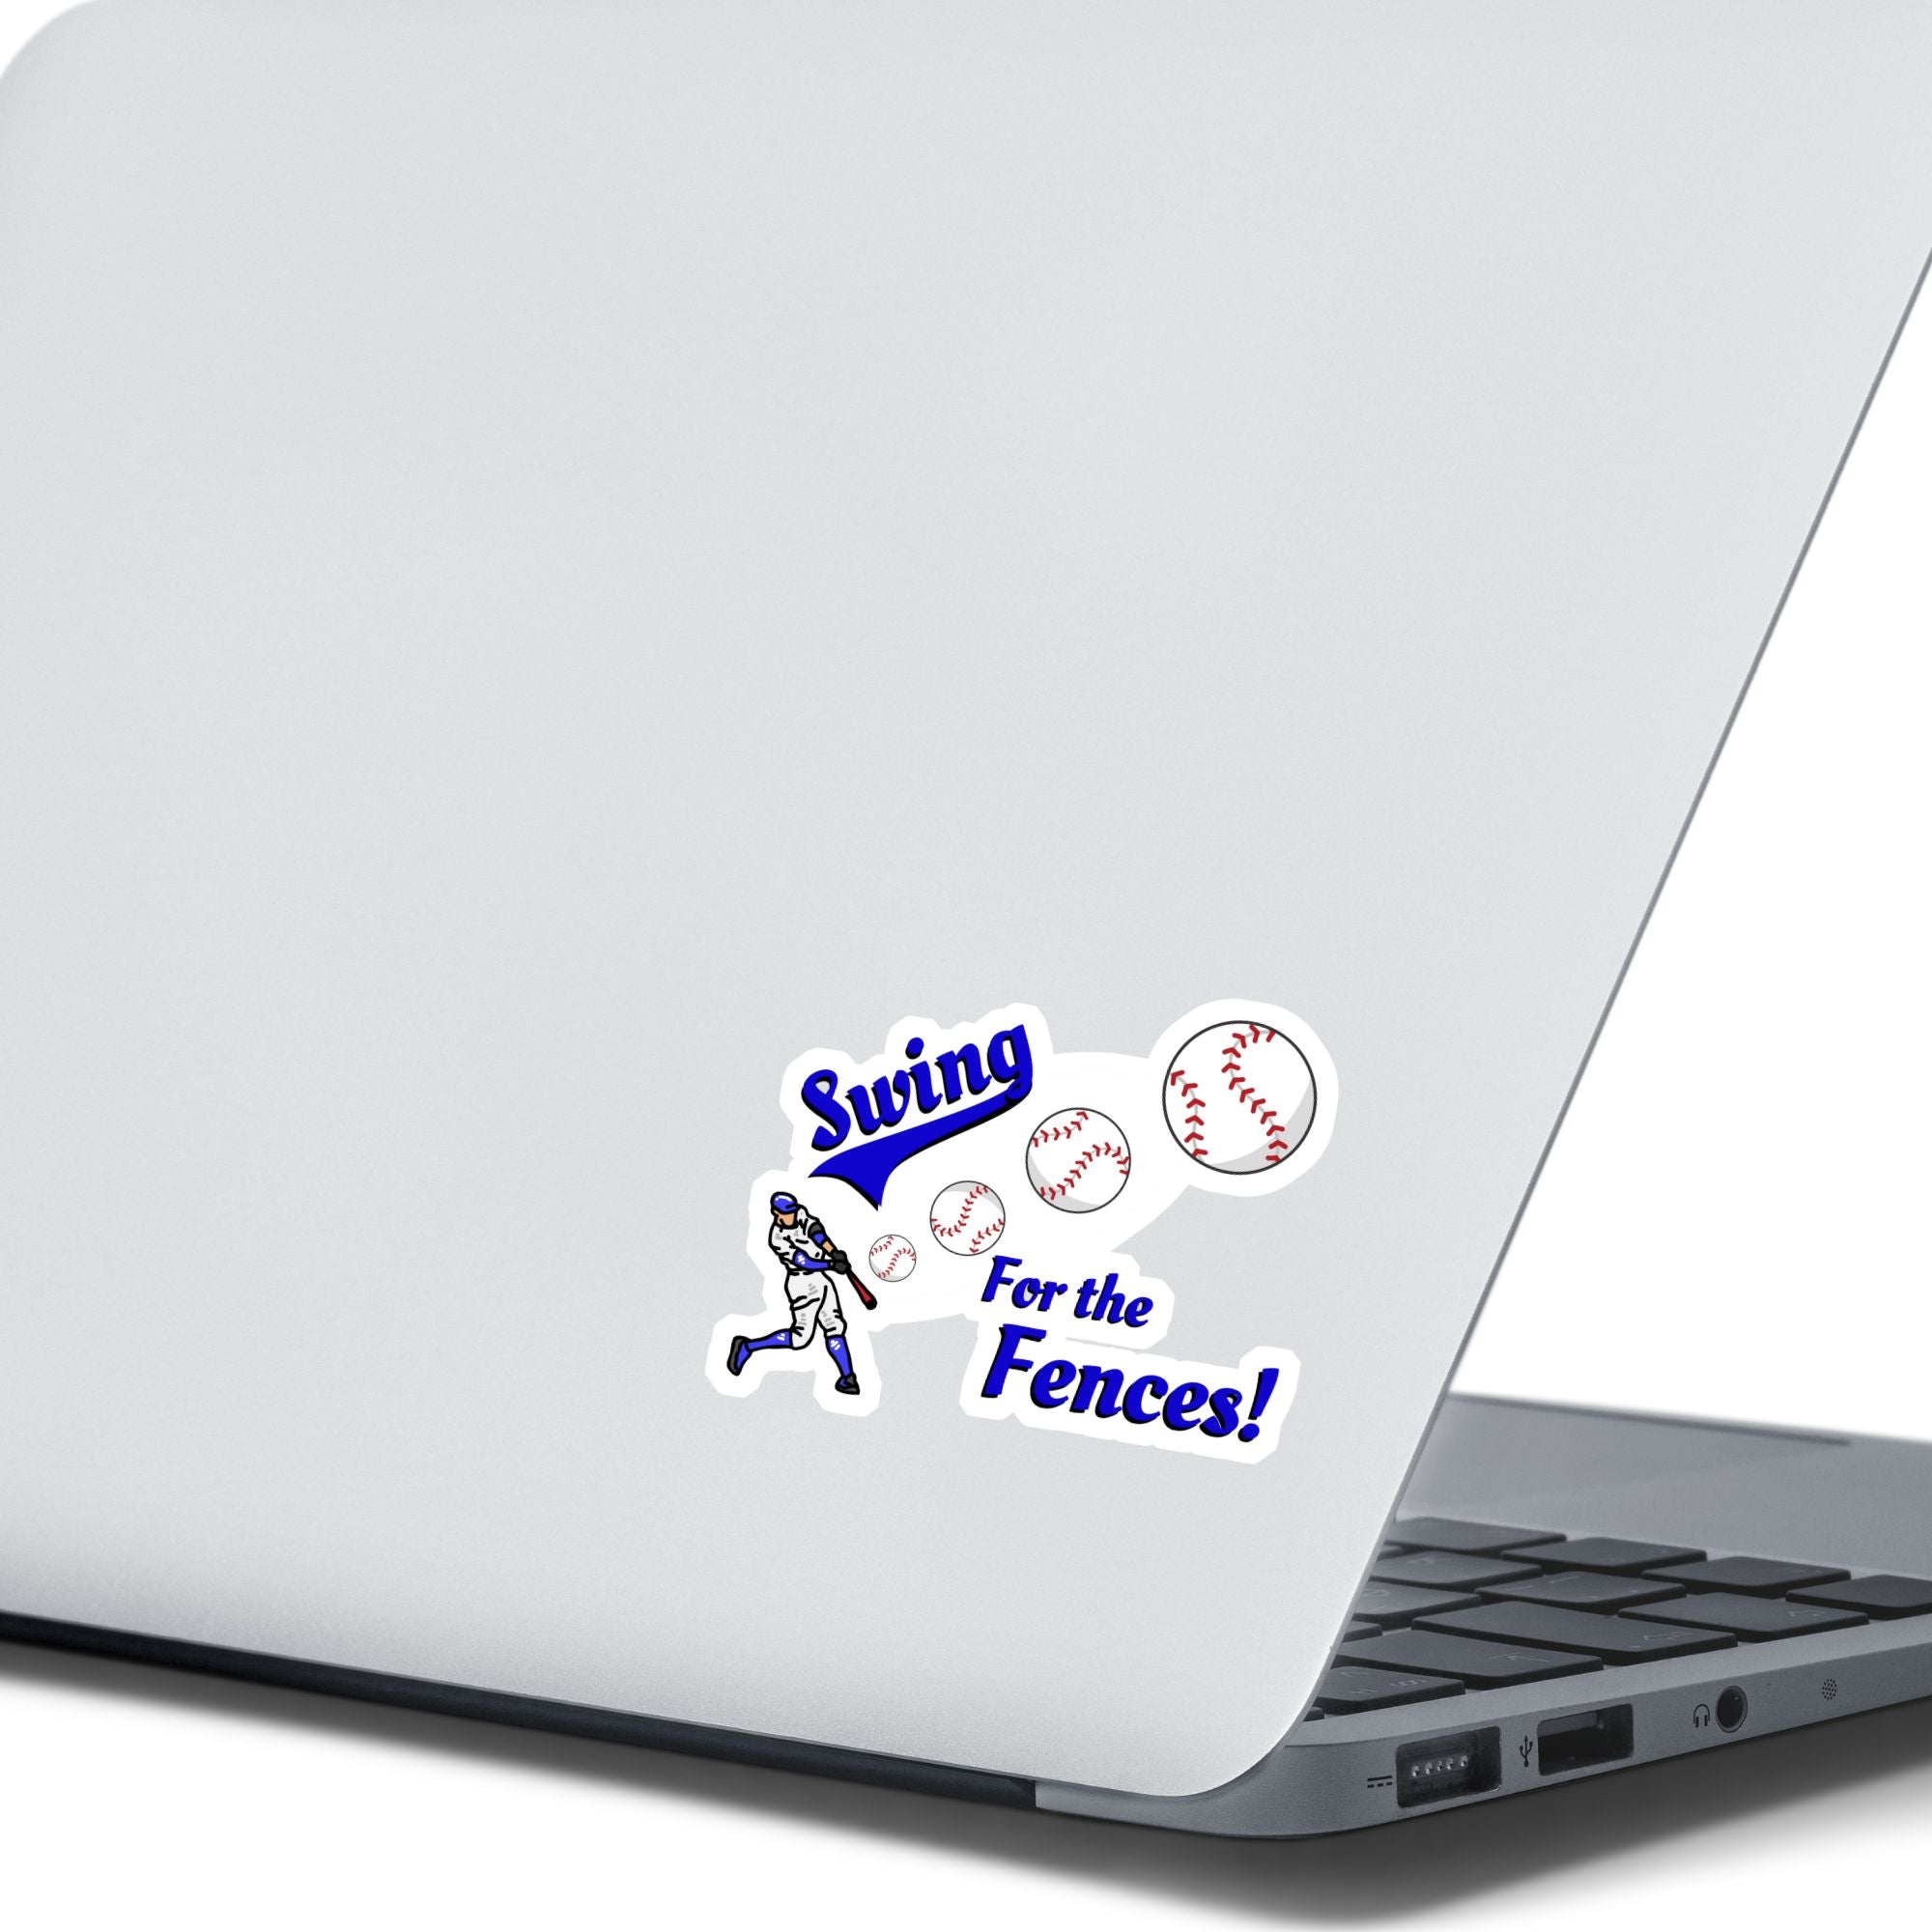 Swing for the Fences! - good for baseball and softball, but also as a metaphor for living our lives! This individual die-cut sticker features a ball player hitting a ball as it moves out towards us with the words Swing for the Fences. Check out our Inspirational collection for more inspiring stickers! This image shows the Swing for the Fences sticker on the back of an open laptop.